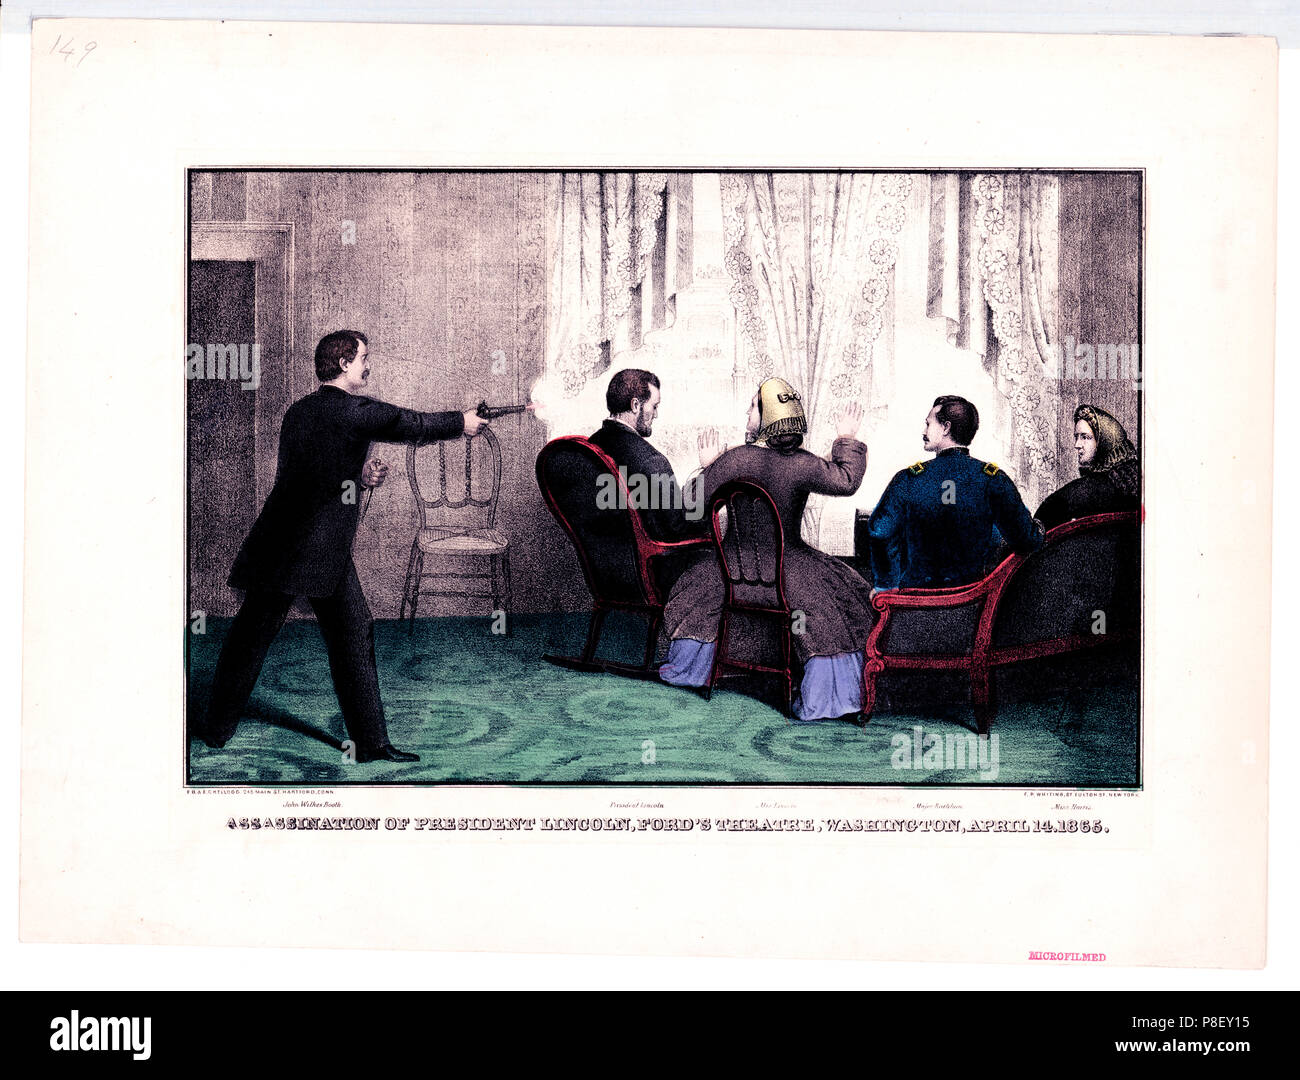 The Assassination of President Lincoln April 14 NEW Vintage POSTER 1865 